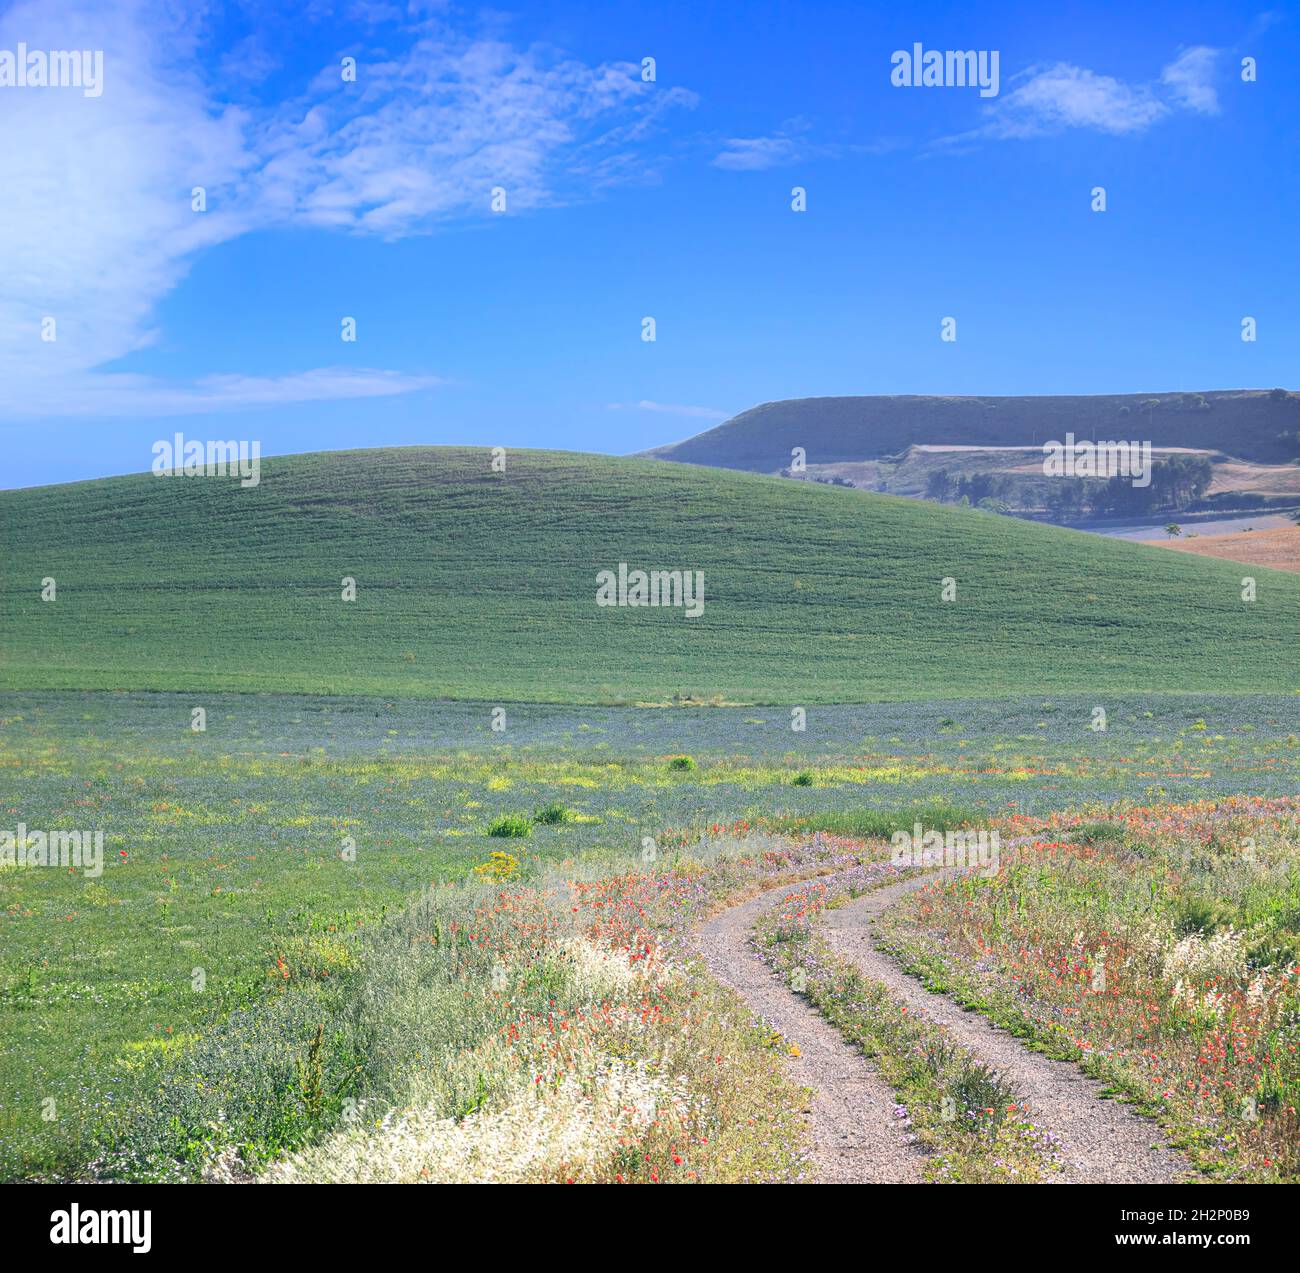 SPRINGTIME. Between Apulia and Basilicata: hilly landscape with country road through wheat field end poppies, Italy. Stock Photo